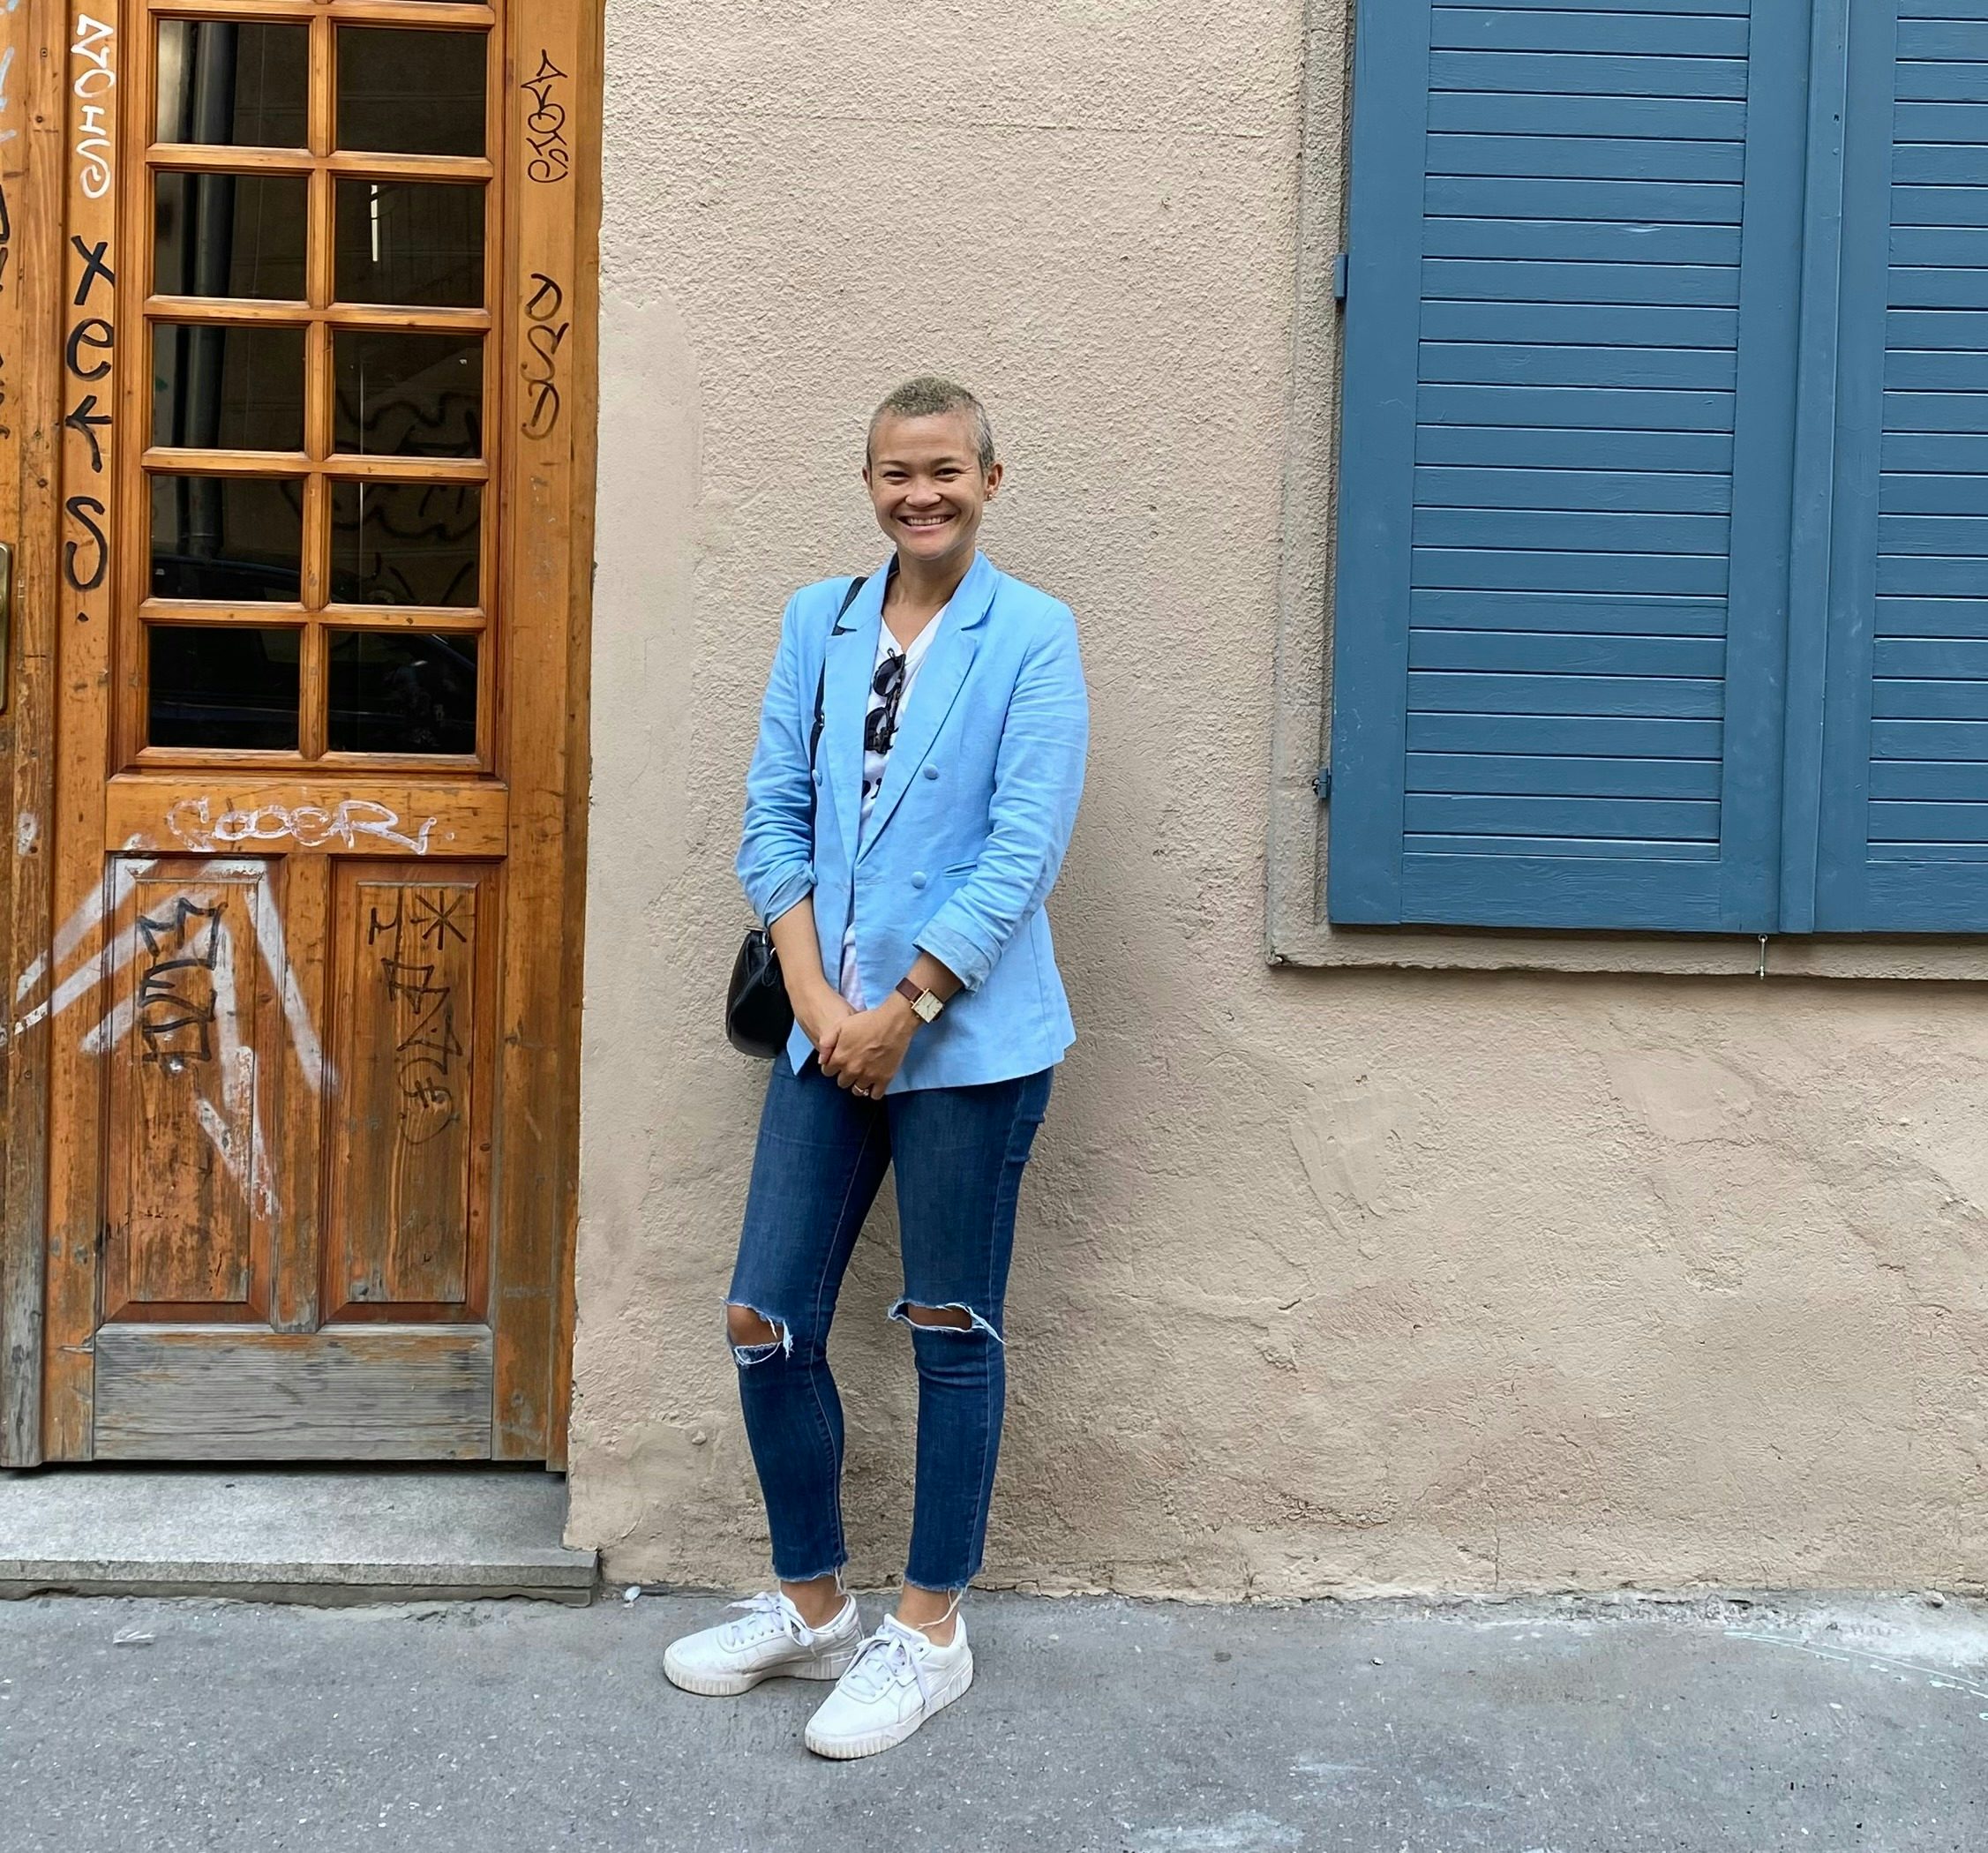 Travel advisor Sequoia Armstrong posing in front of a stone wall and wooden door, while wearing a light blue top.